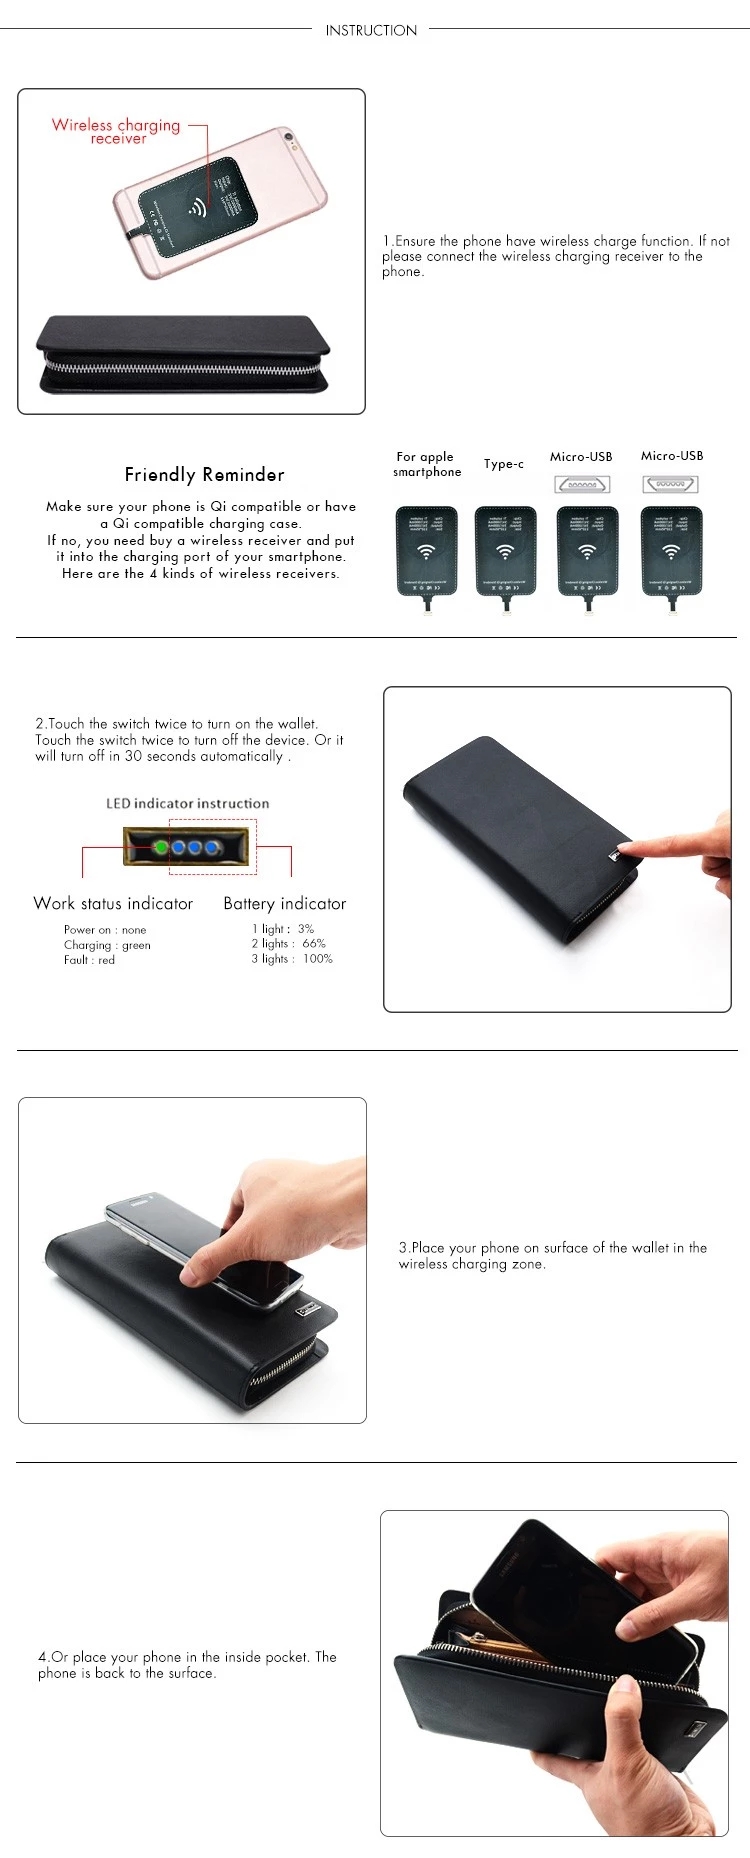 how to use wireless charging wallet